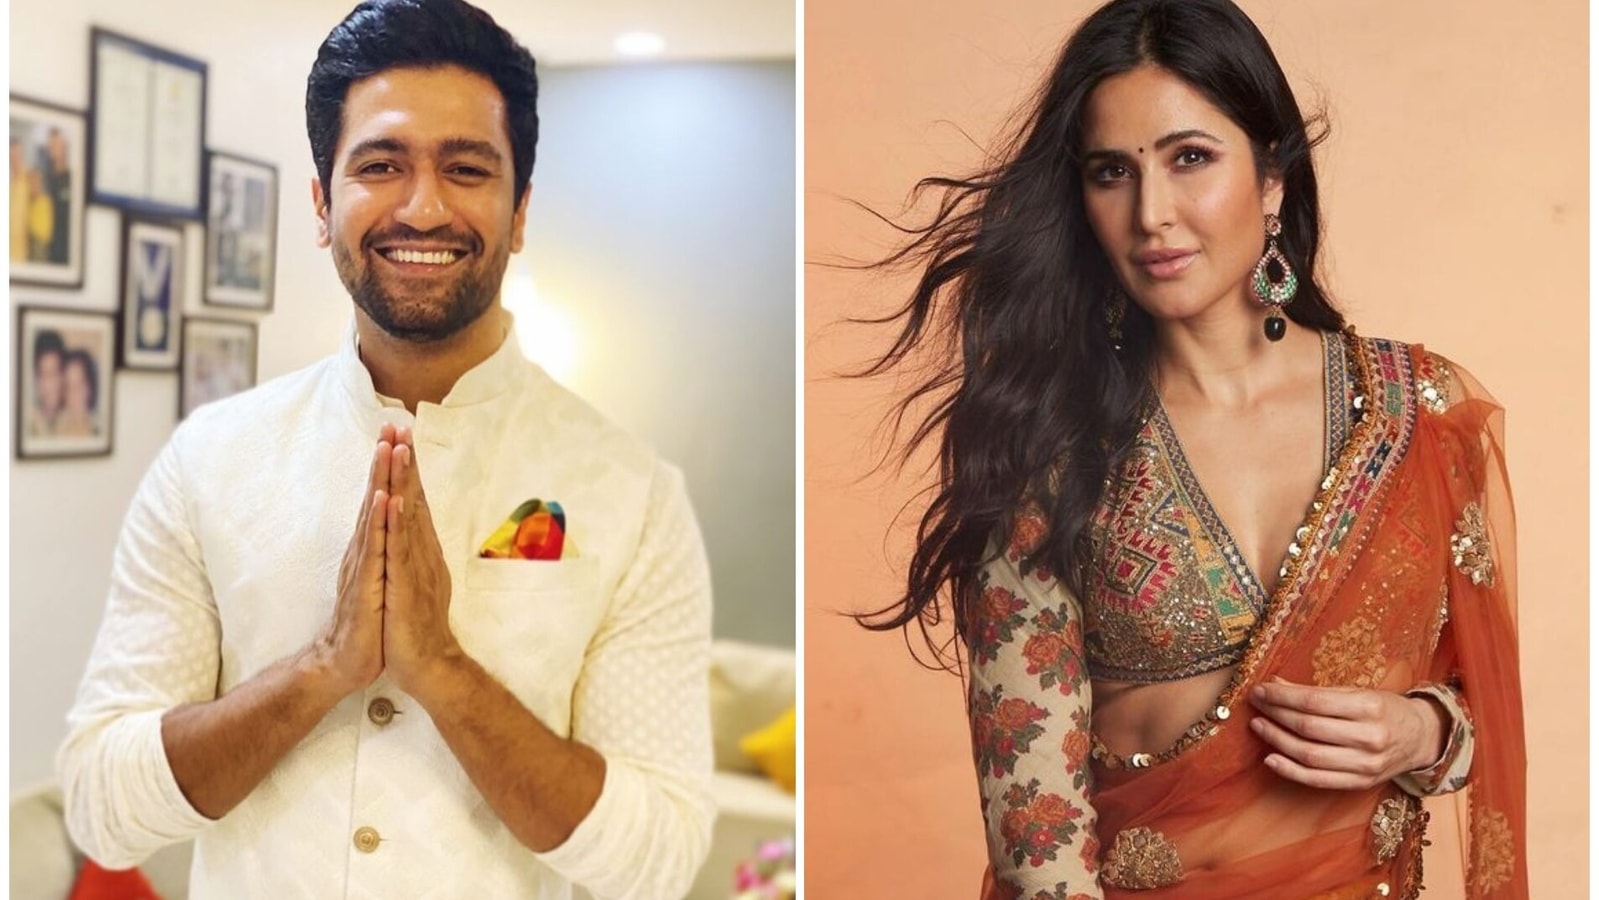 Katrina Kaif reacts to reports of her winter wedding with Vicky Kaushal